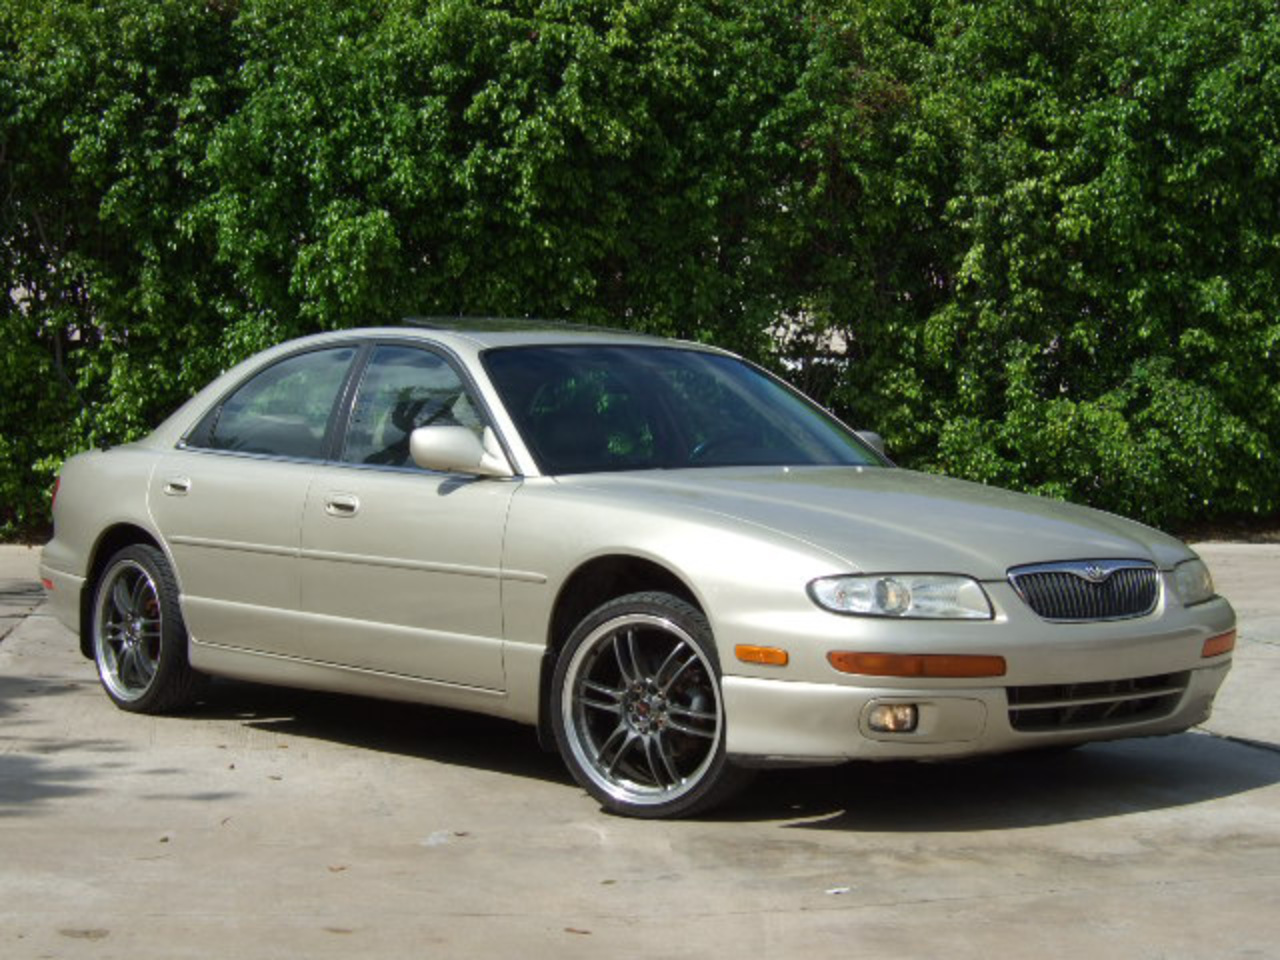 1996 Mazda Millenia 4 Dr S Supercharged Sedan picture